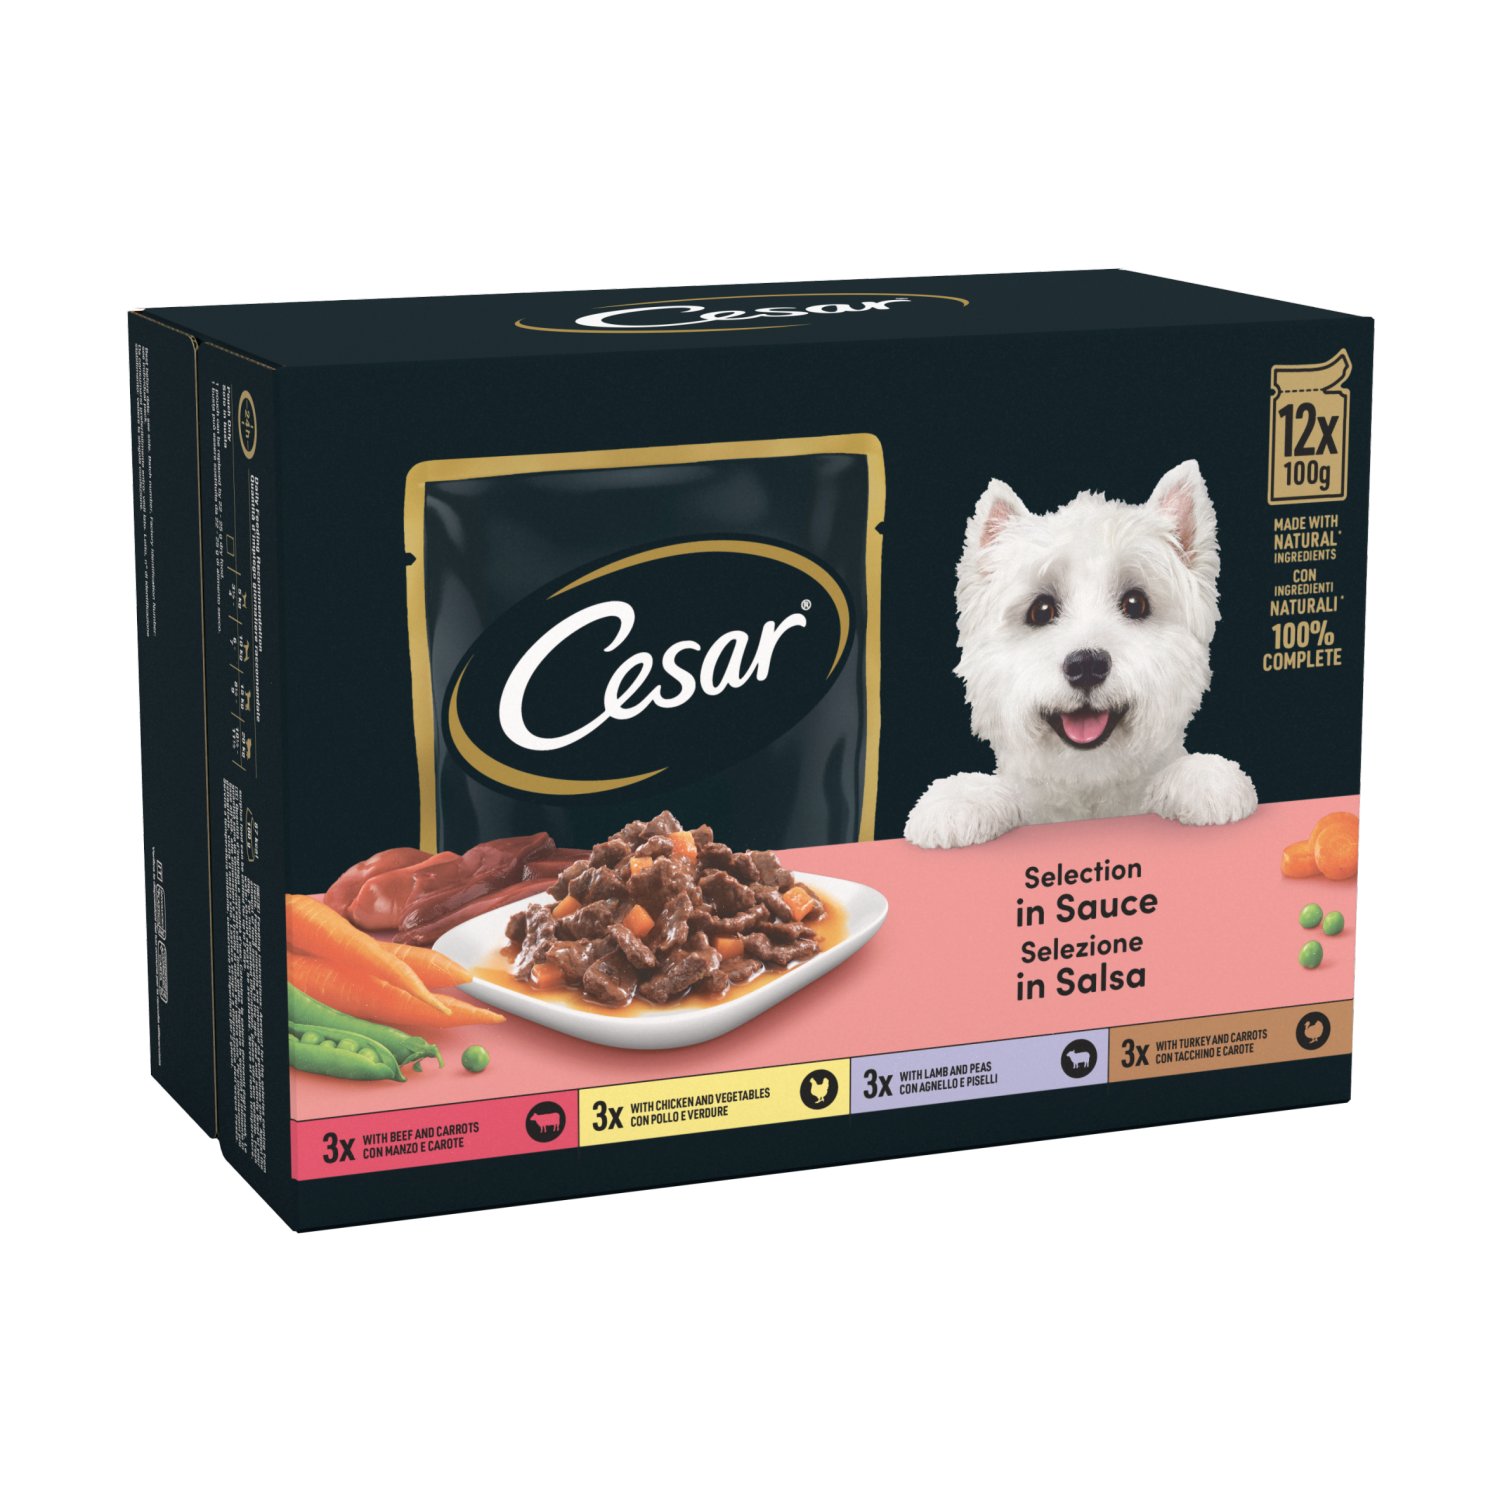 Cesar Selection in Sauce Variety Dog Food 12 Pack (1.2 kg)